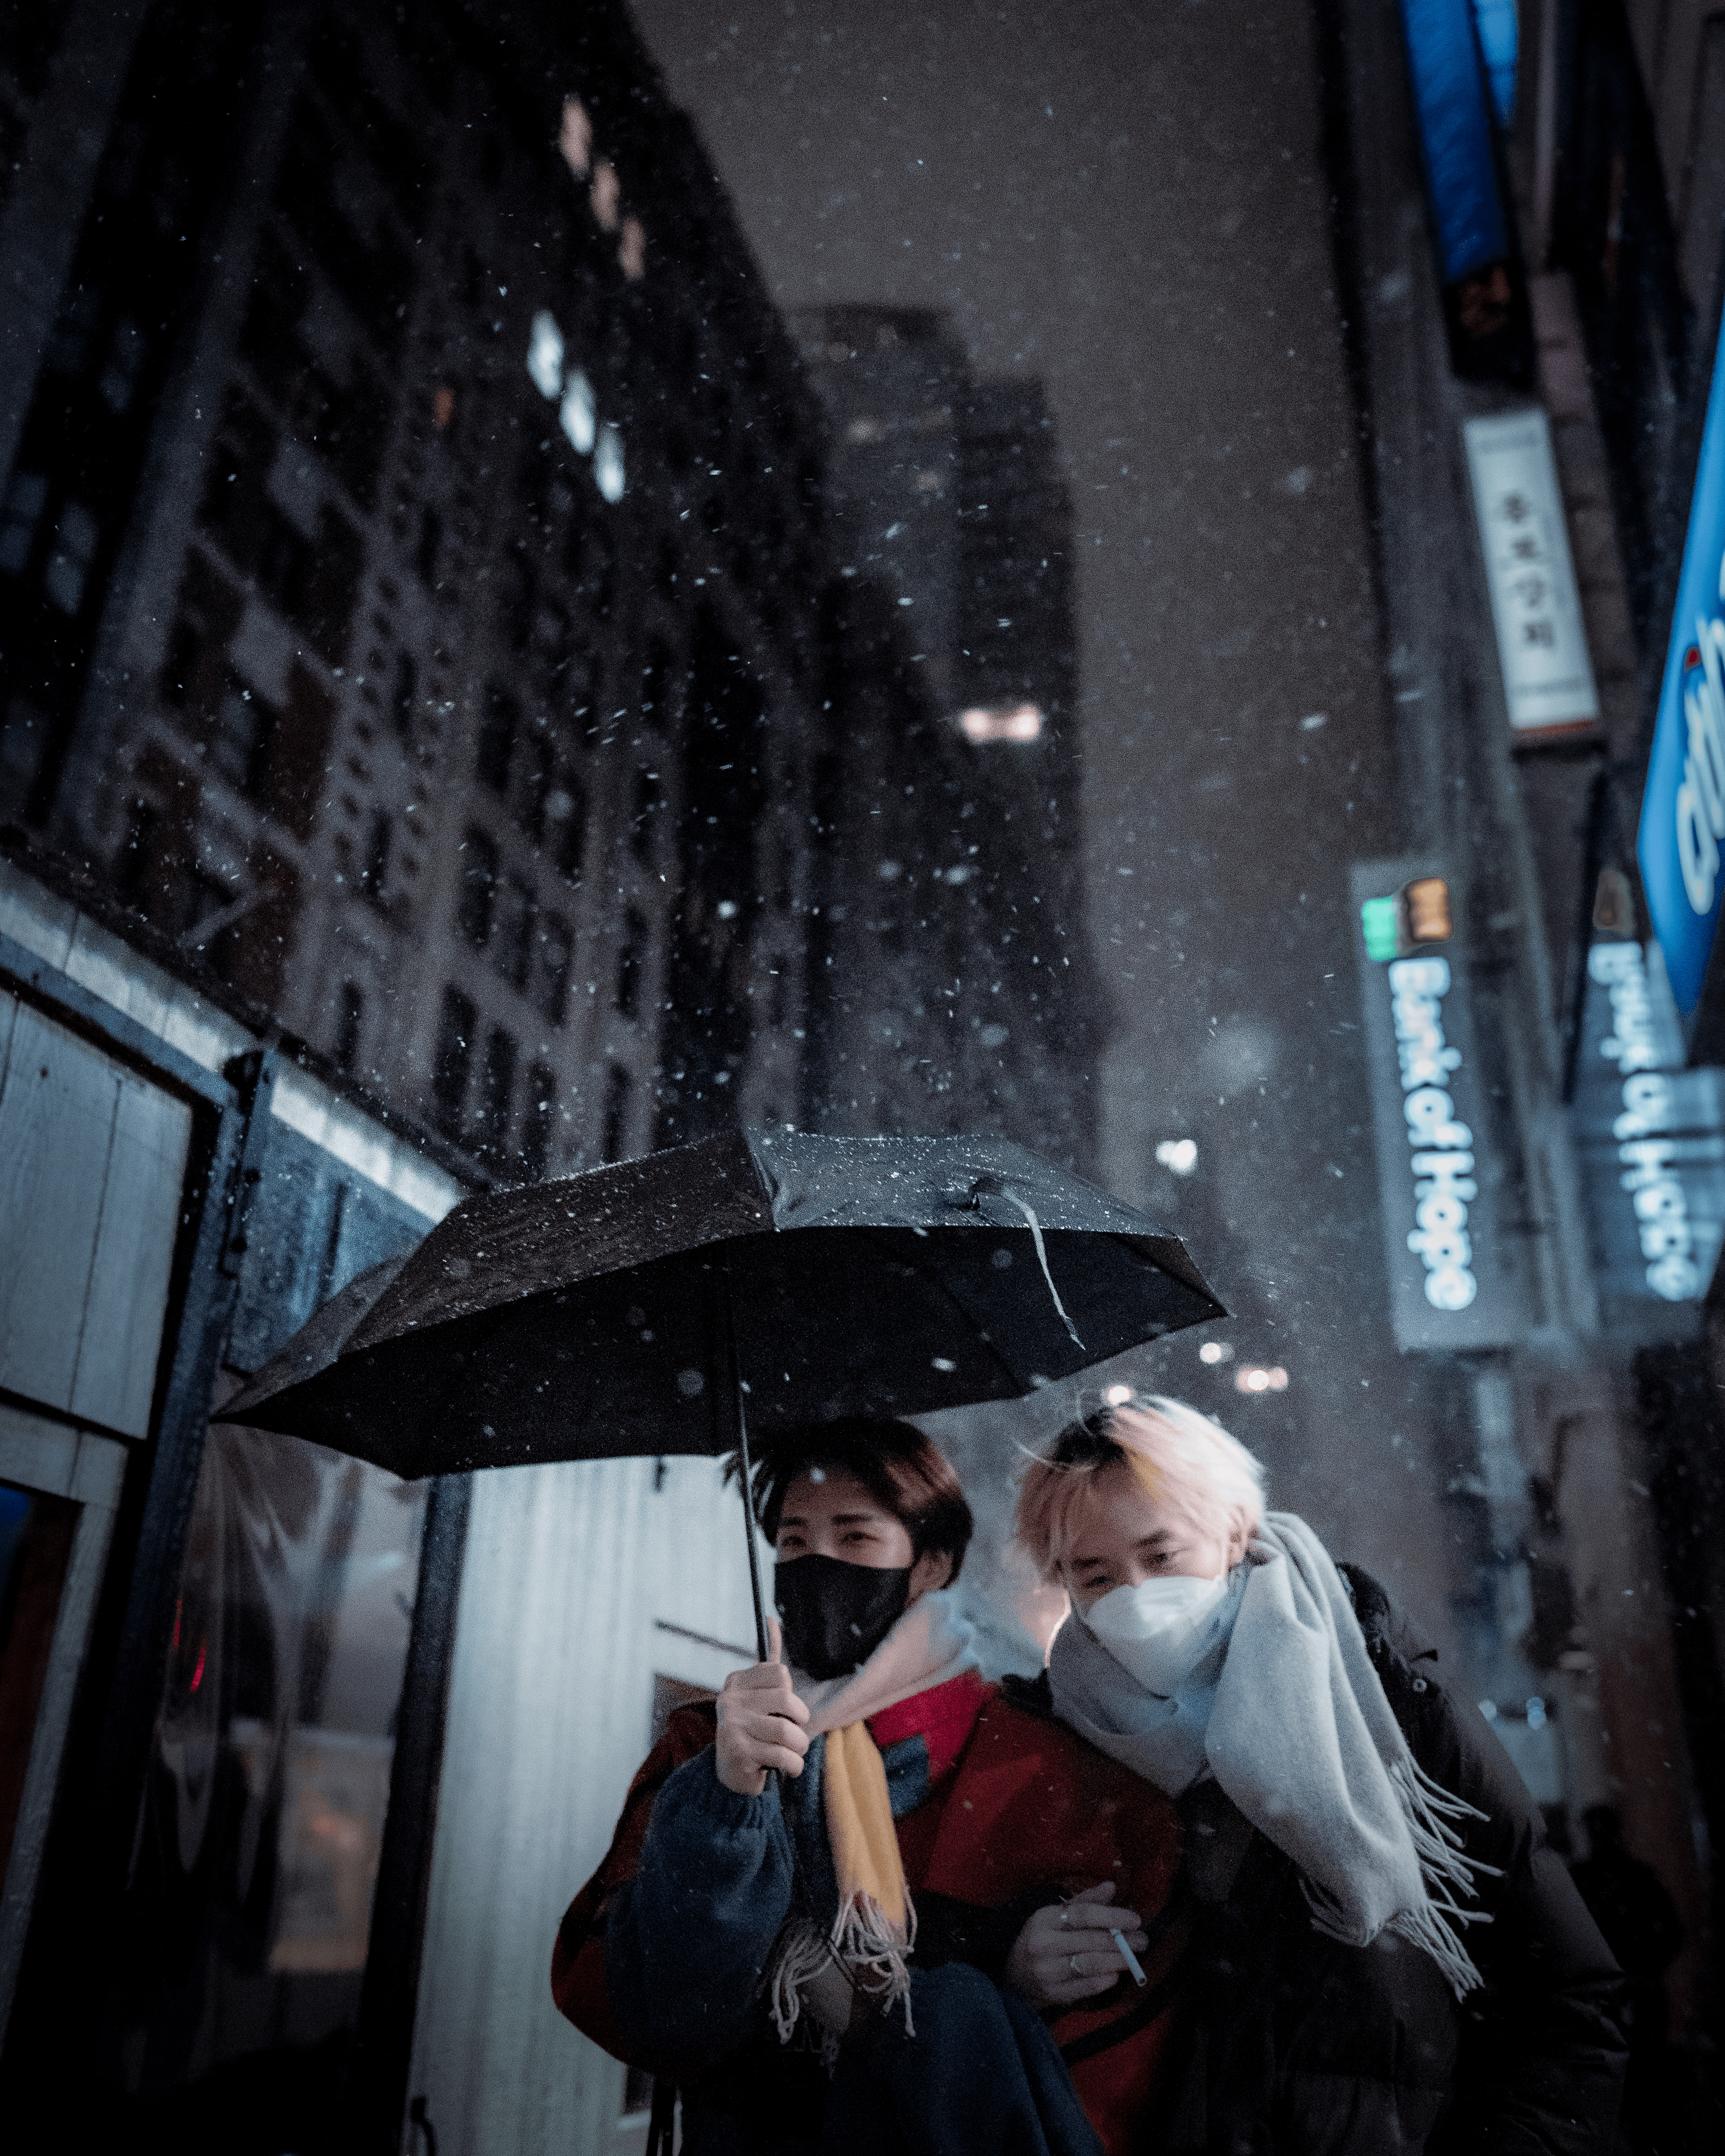 We Can Weather Any Storm, Together.